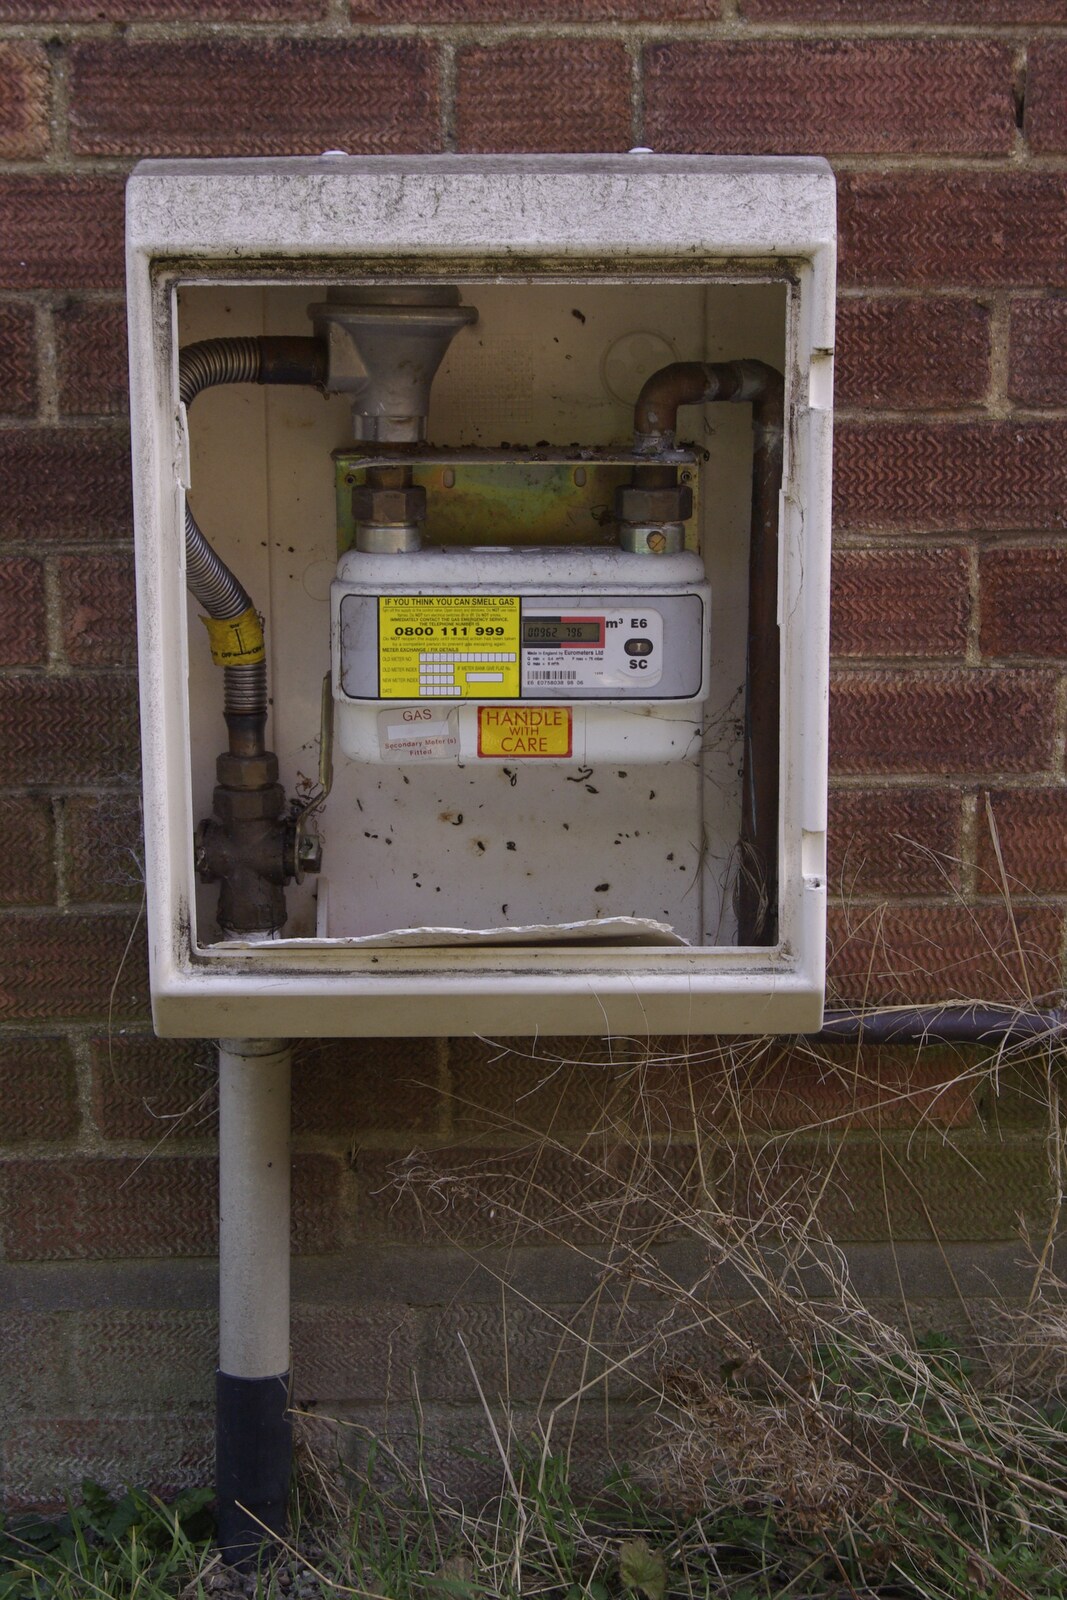 A broken gas meter from The Derelict Salam Newsagents, Perne Road, Cambridge - 18th March 2007